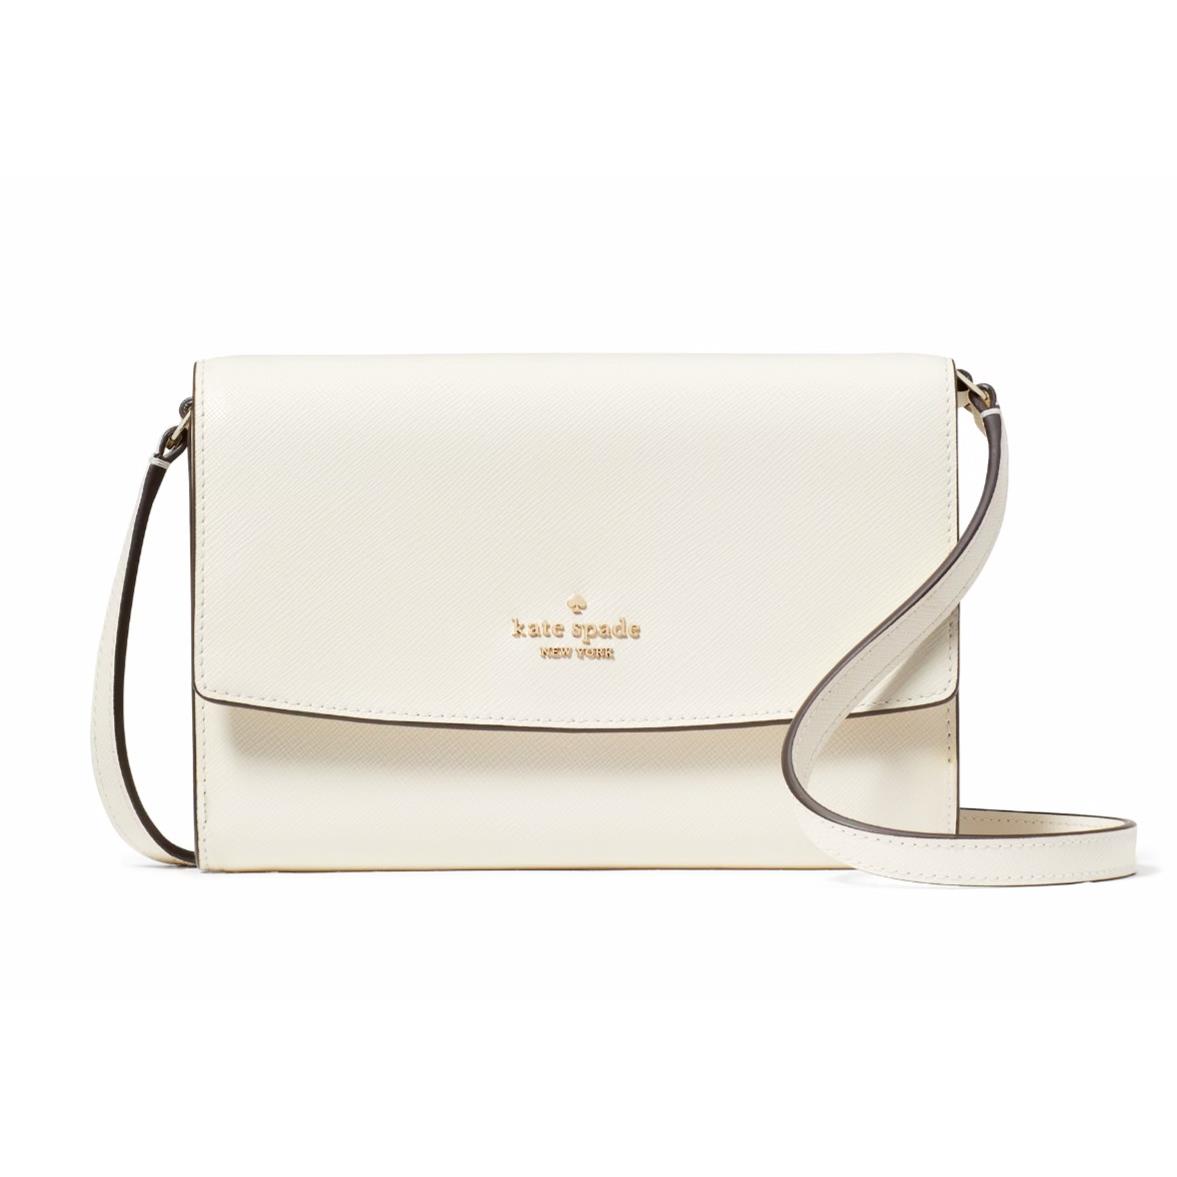 New Kate Spade Perry Leather Crossbody Meringue with Dust Bag